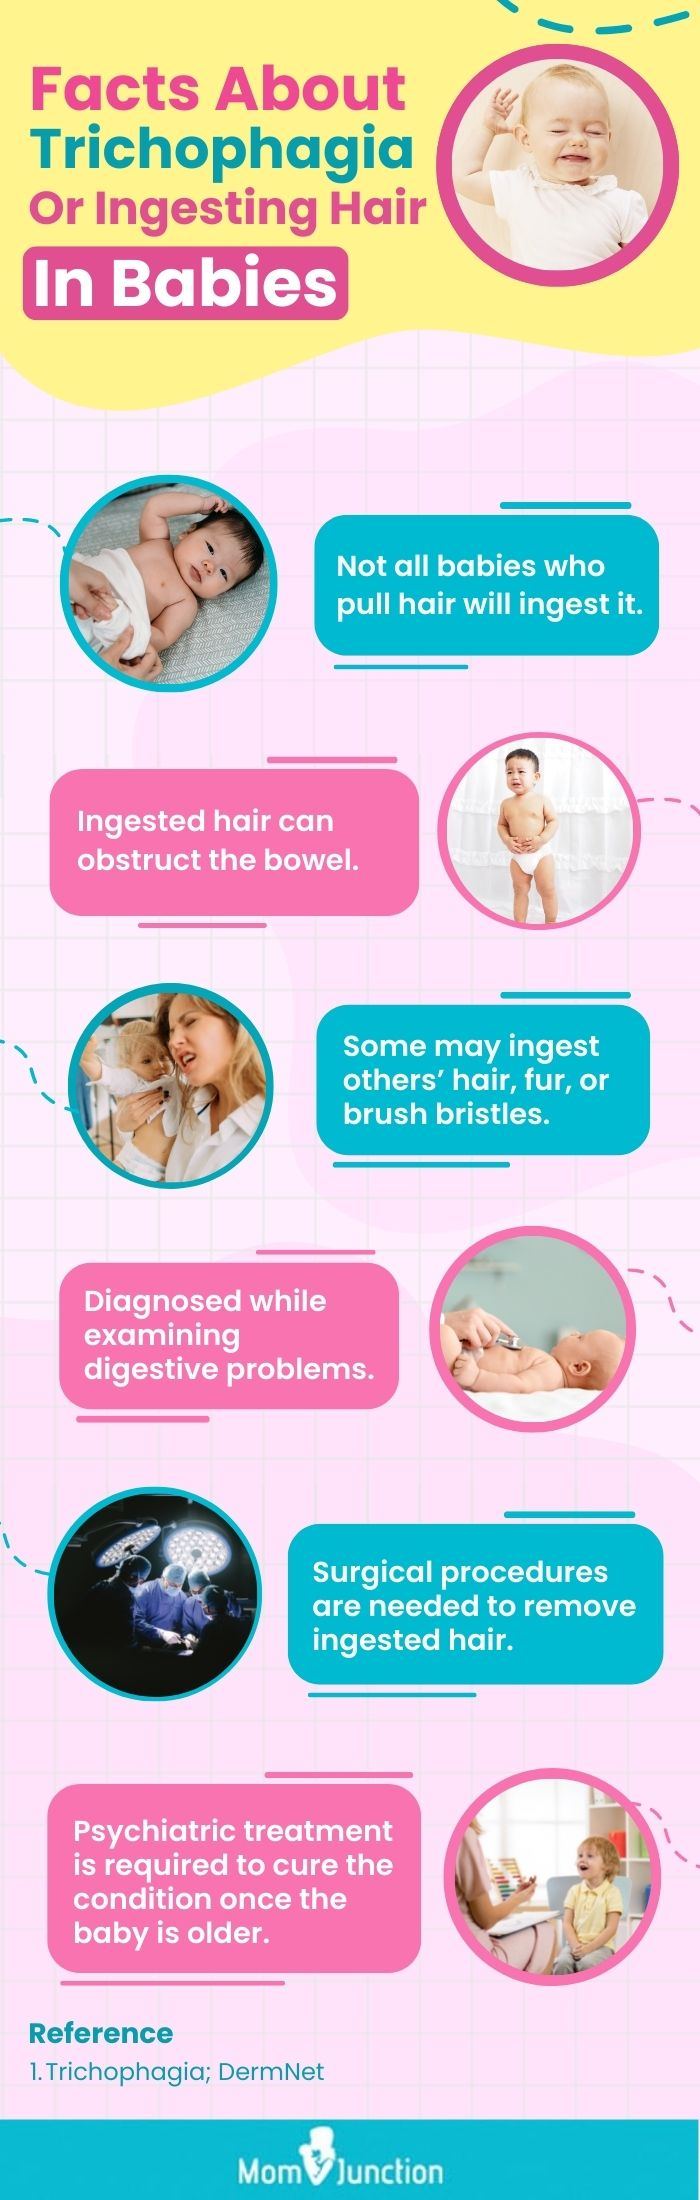 facts about trichophagia or ingesting hair in babies (infographic)